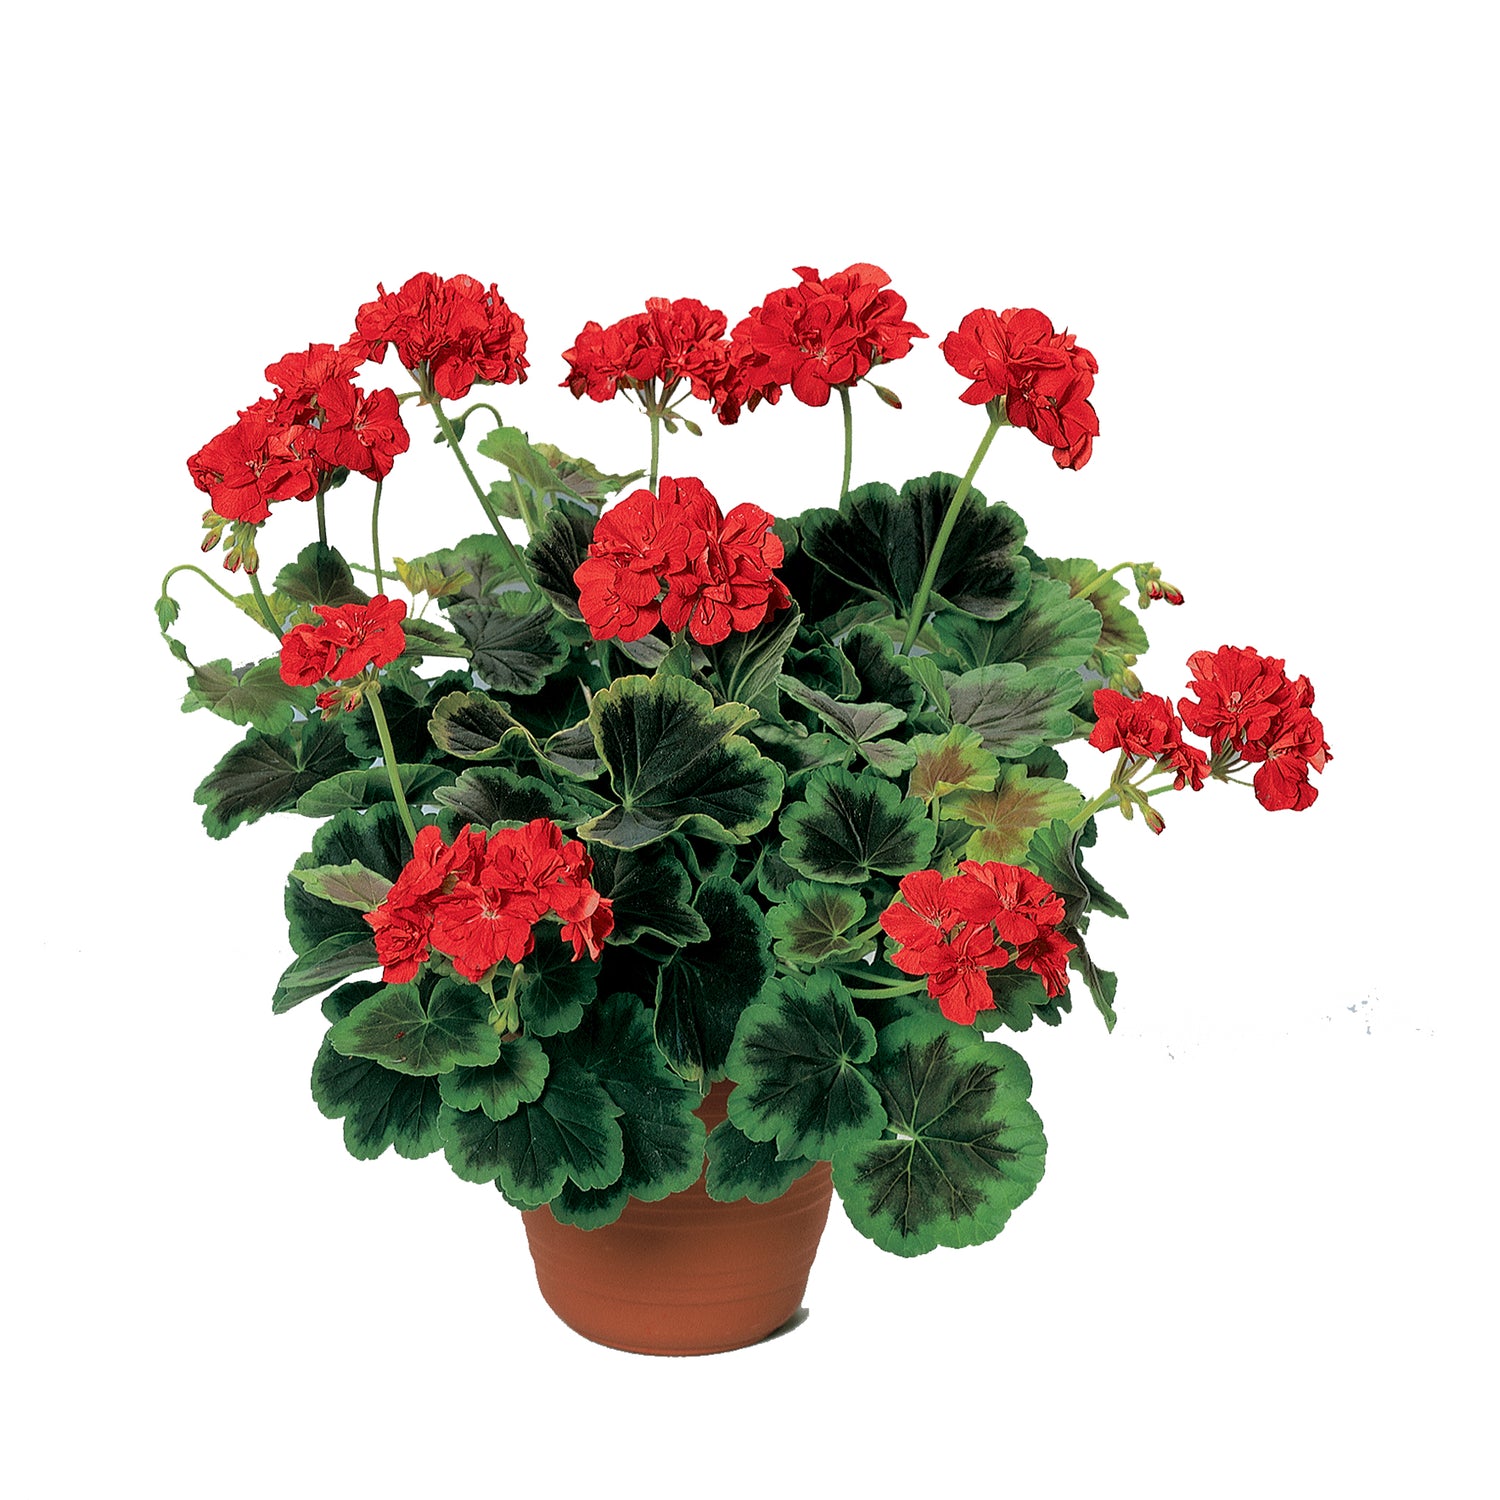 Variegated Upright Geranium Collection